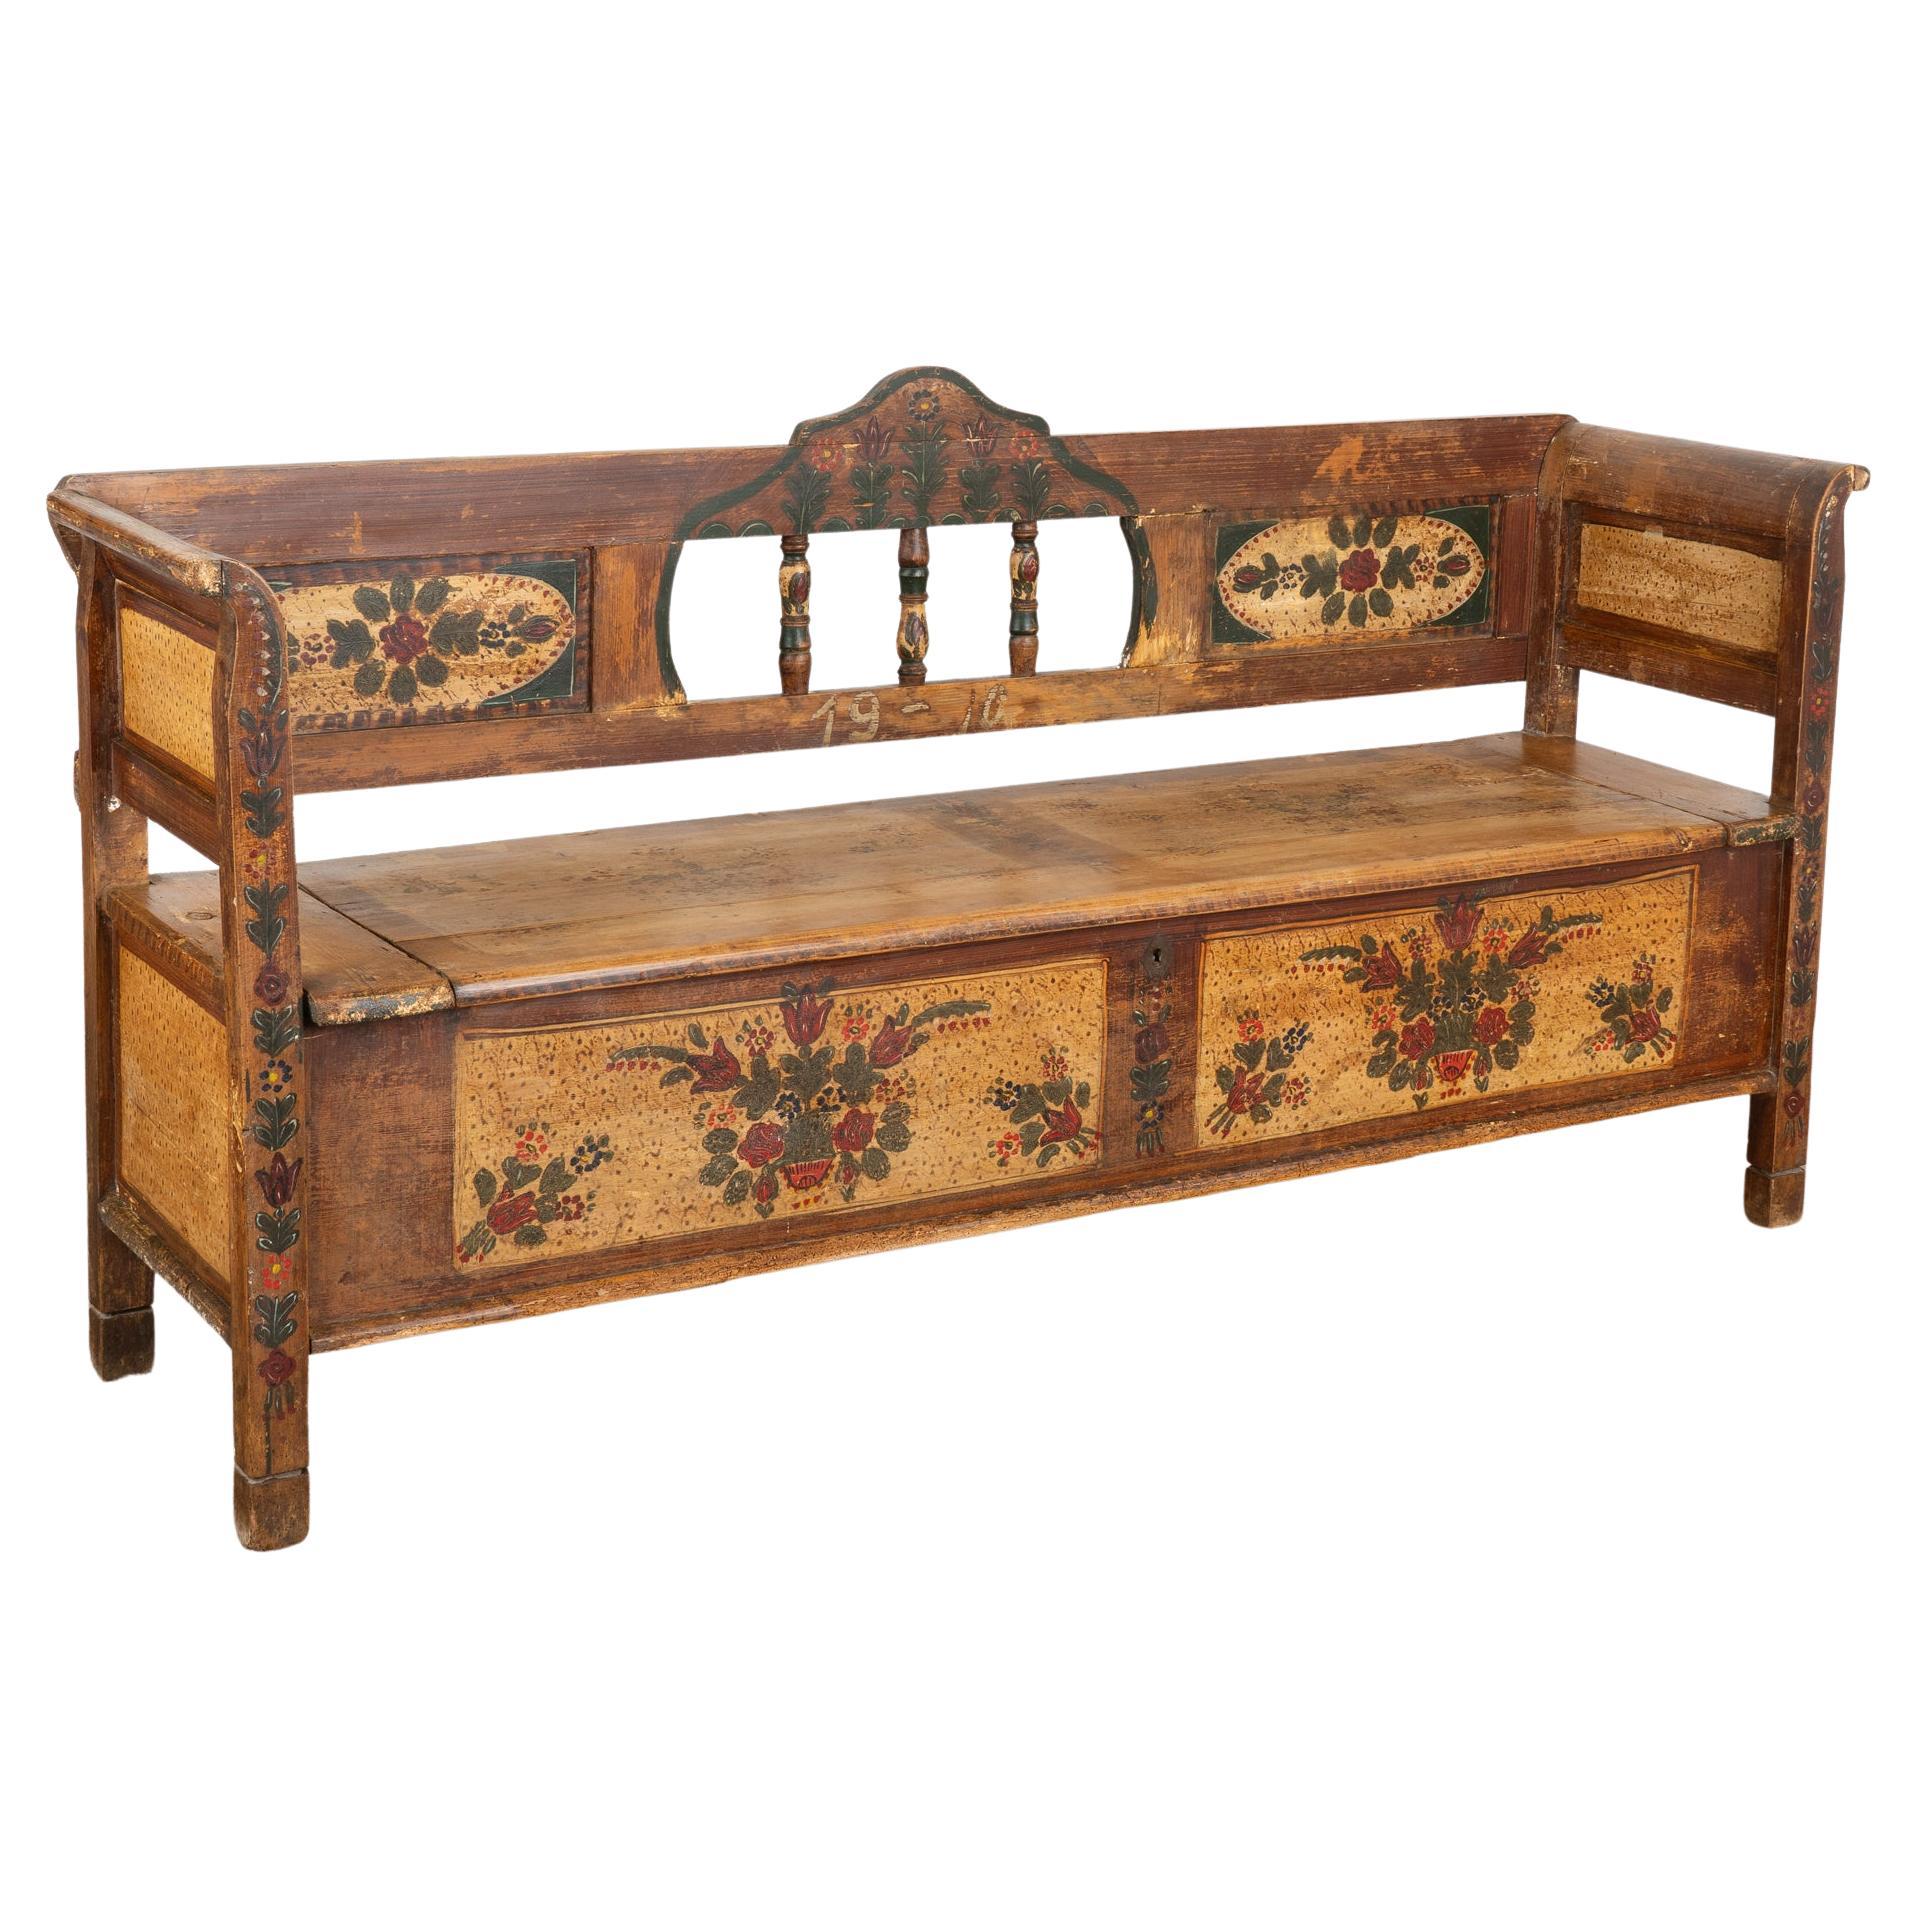 Original Painted Pine Bench With Storage, Hungary dated 1910 For Sale